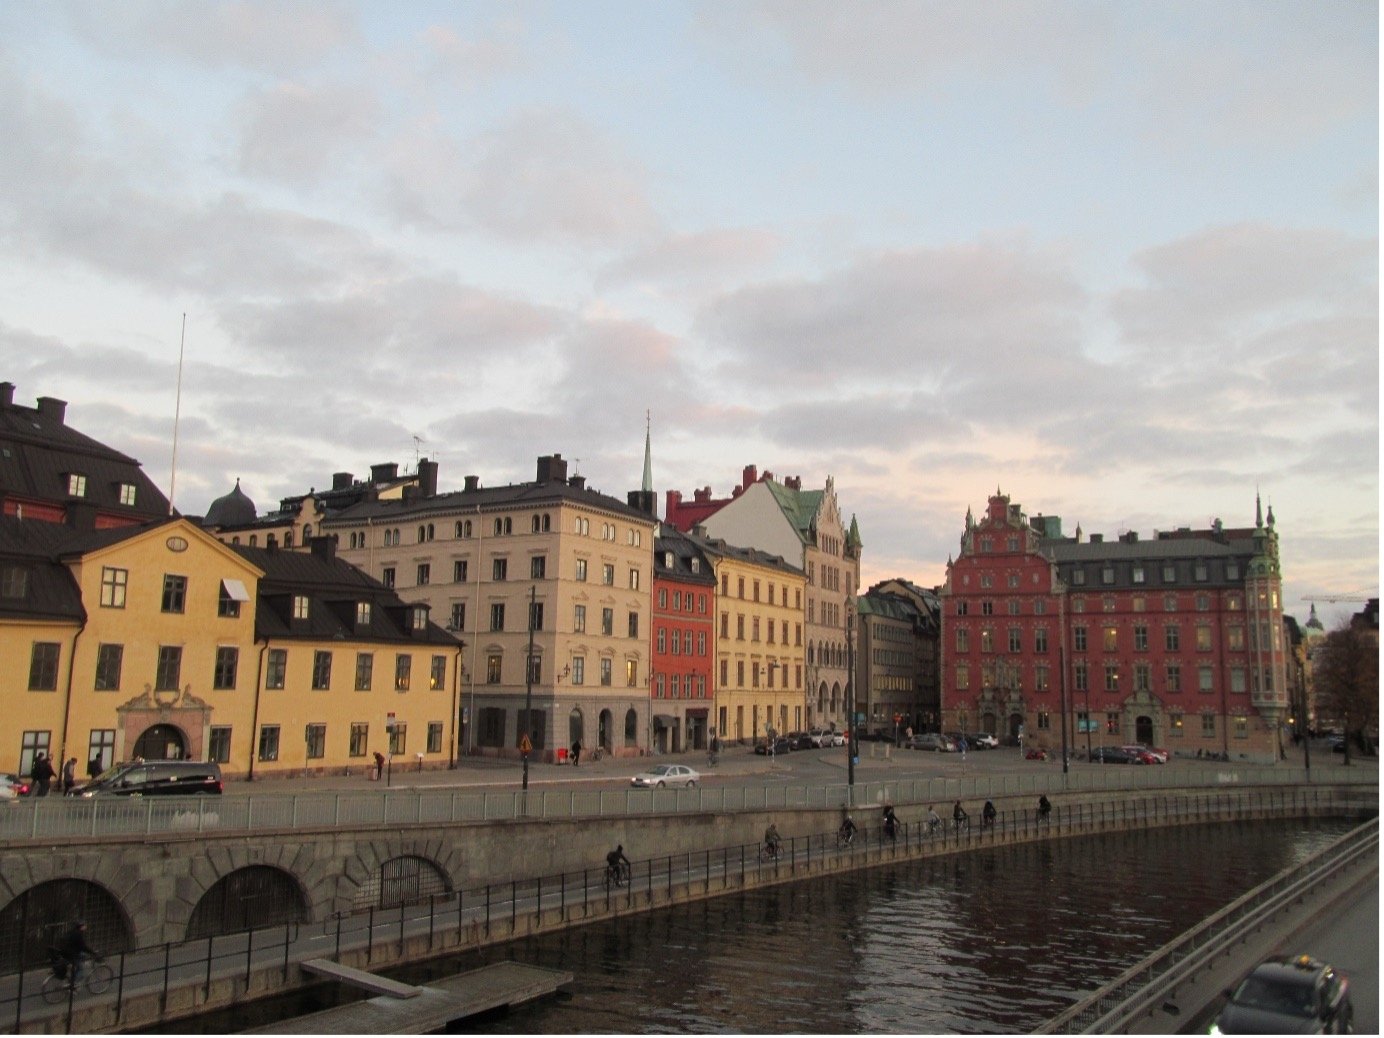 The colorful and ancient buildings of Stockholm are surrounded by a calm river. (Photo courtesy of Karin)